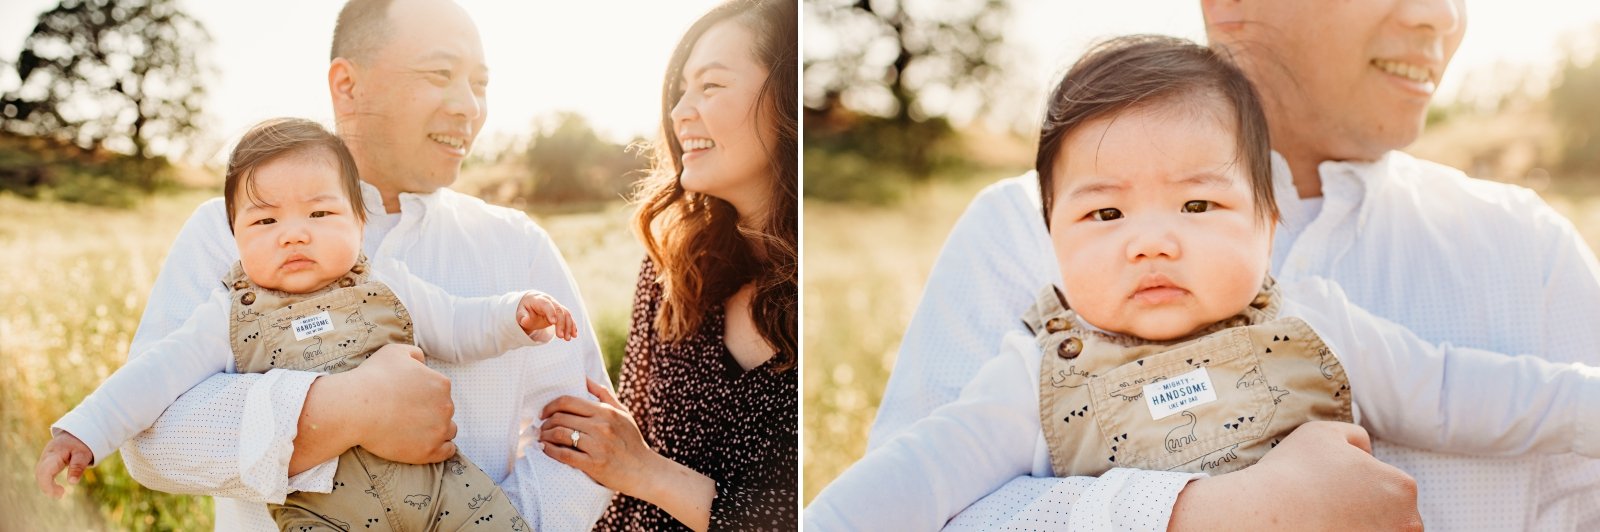 EAST BAY AREA FAMILY PHOTOGRAPHY SHELL RIDGE OPEN SPACE BABY LIFESTYLE PHOTOSHOOT  2.jpg